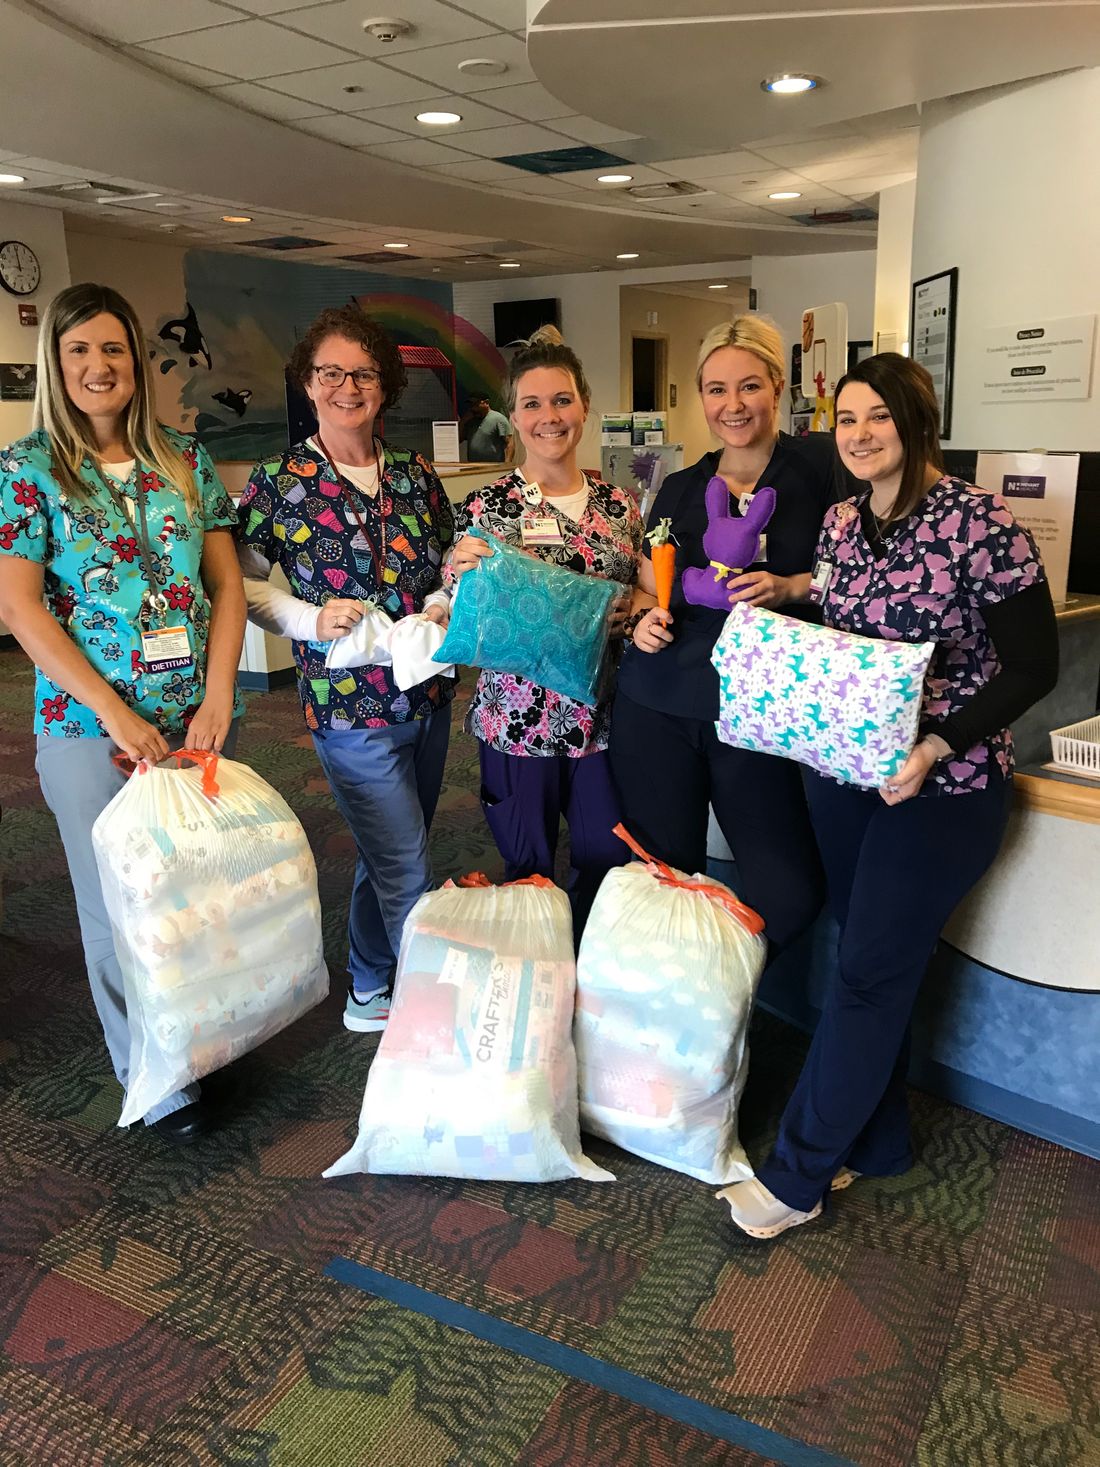 Beautiful hand sewn pillows made and donated by the Cape Fear Sewing Guild in Wilmington, NC, were given to the local hospital.
